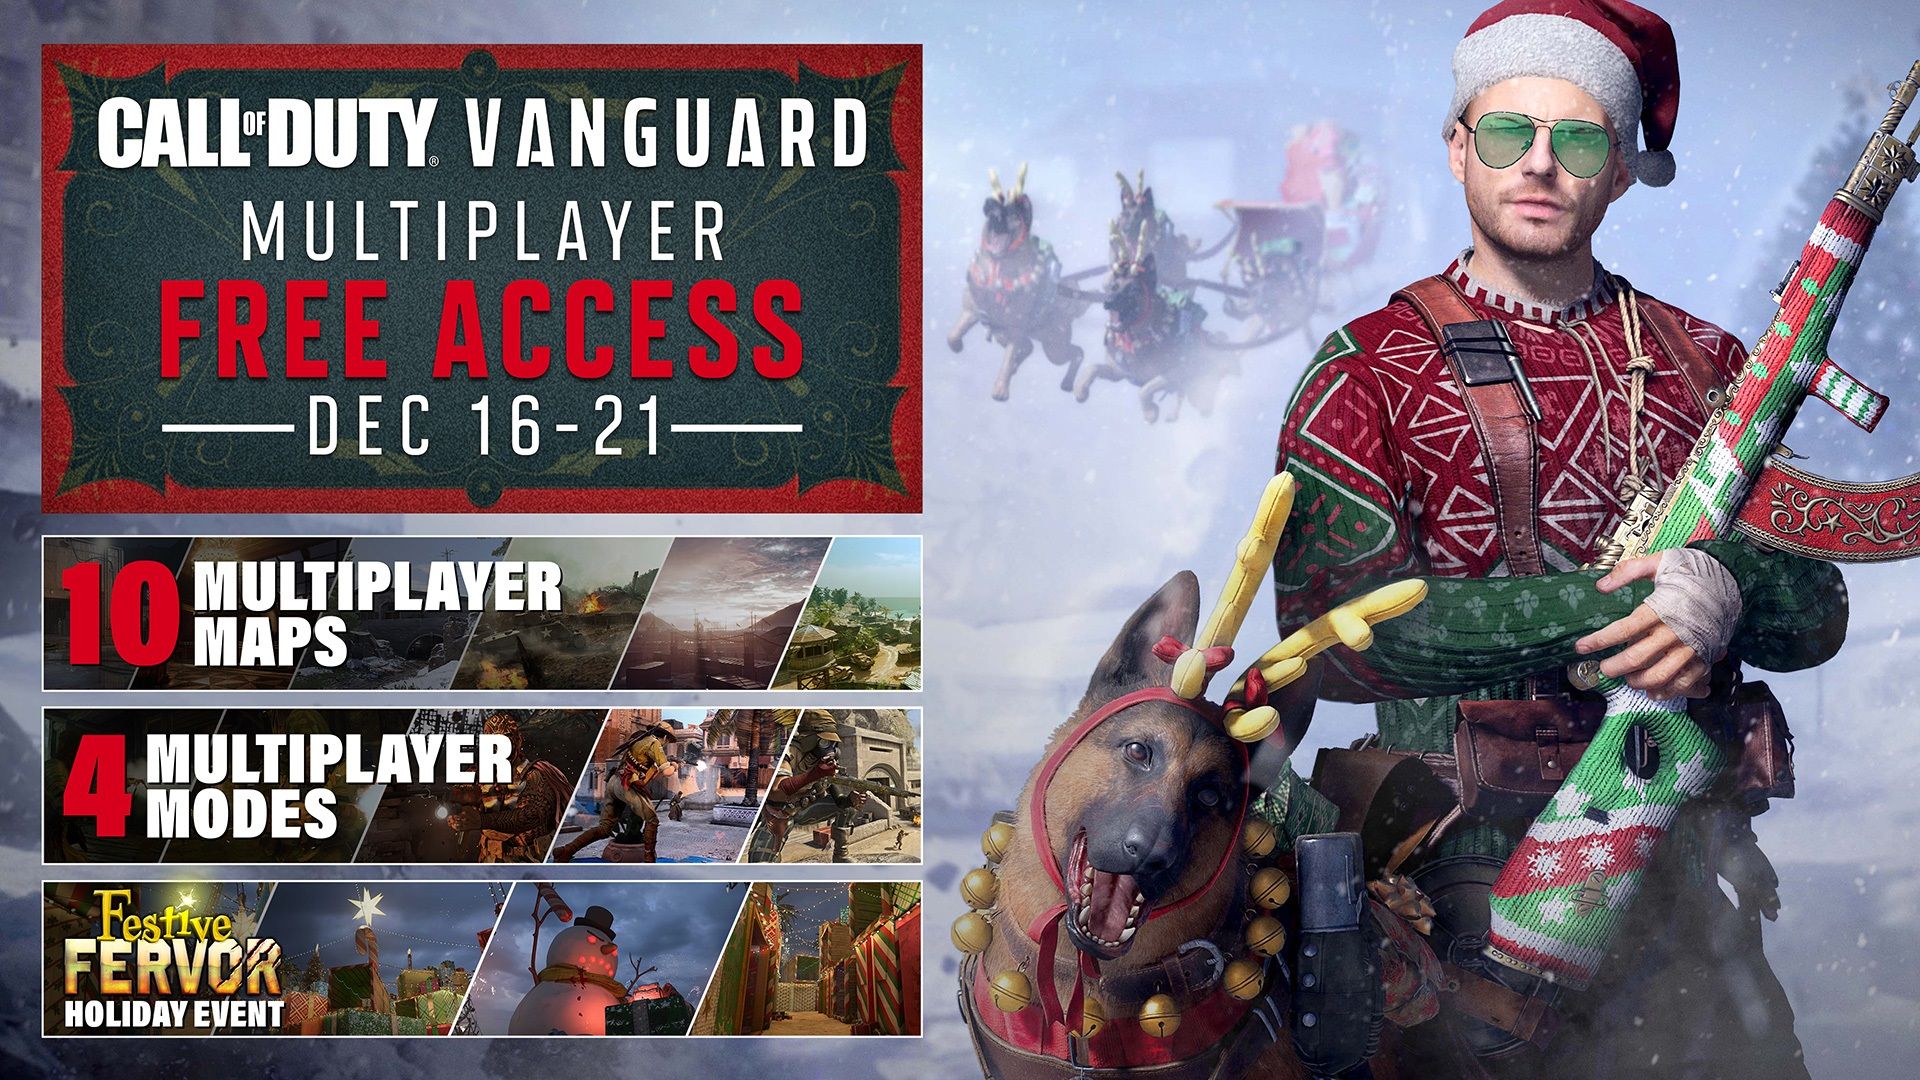 call of duty vanguard multiplayer free access